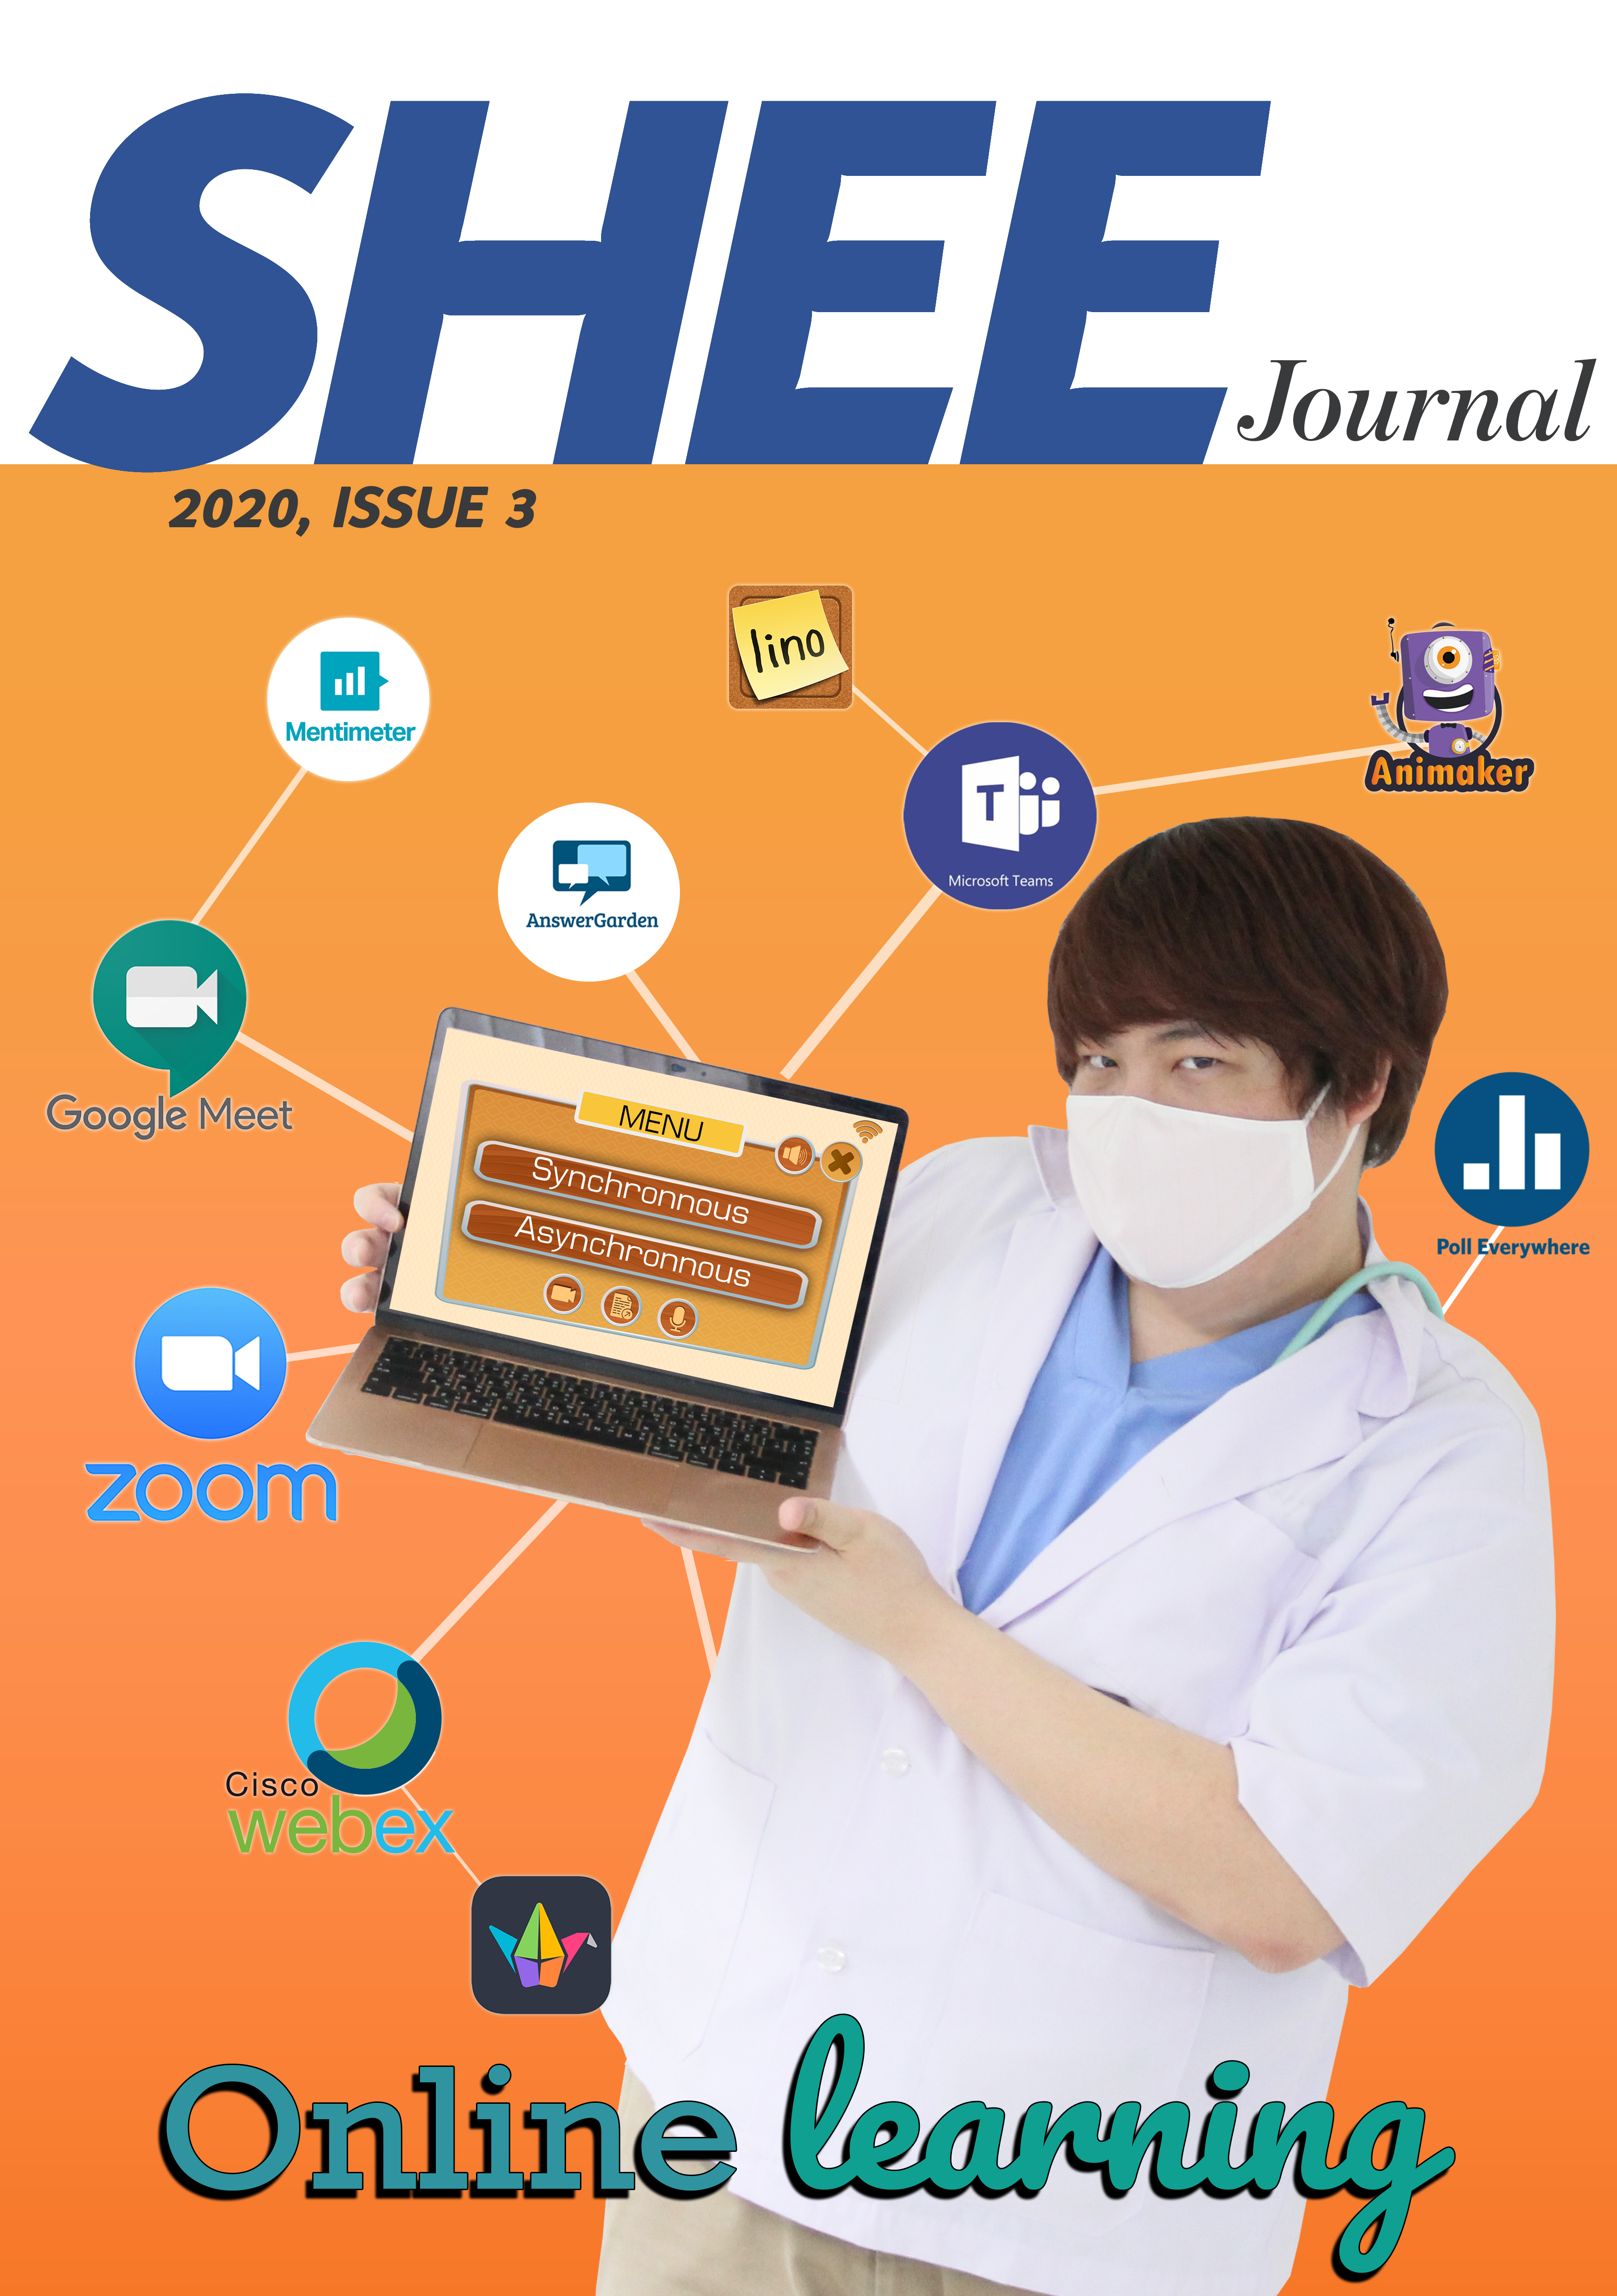 Journal Issue 3, 2020 เรื่อง Online learning